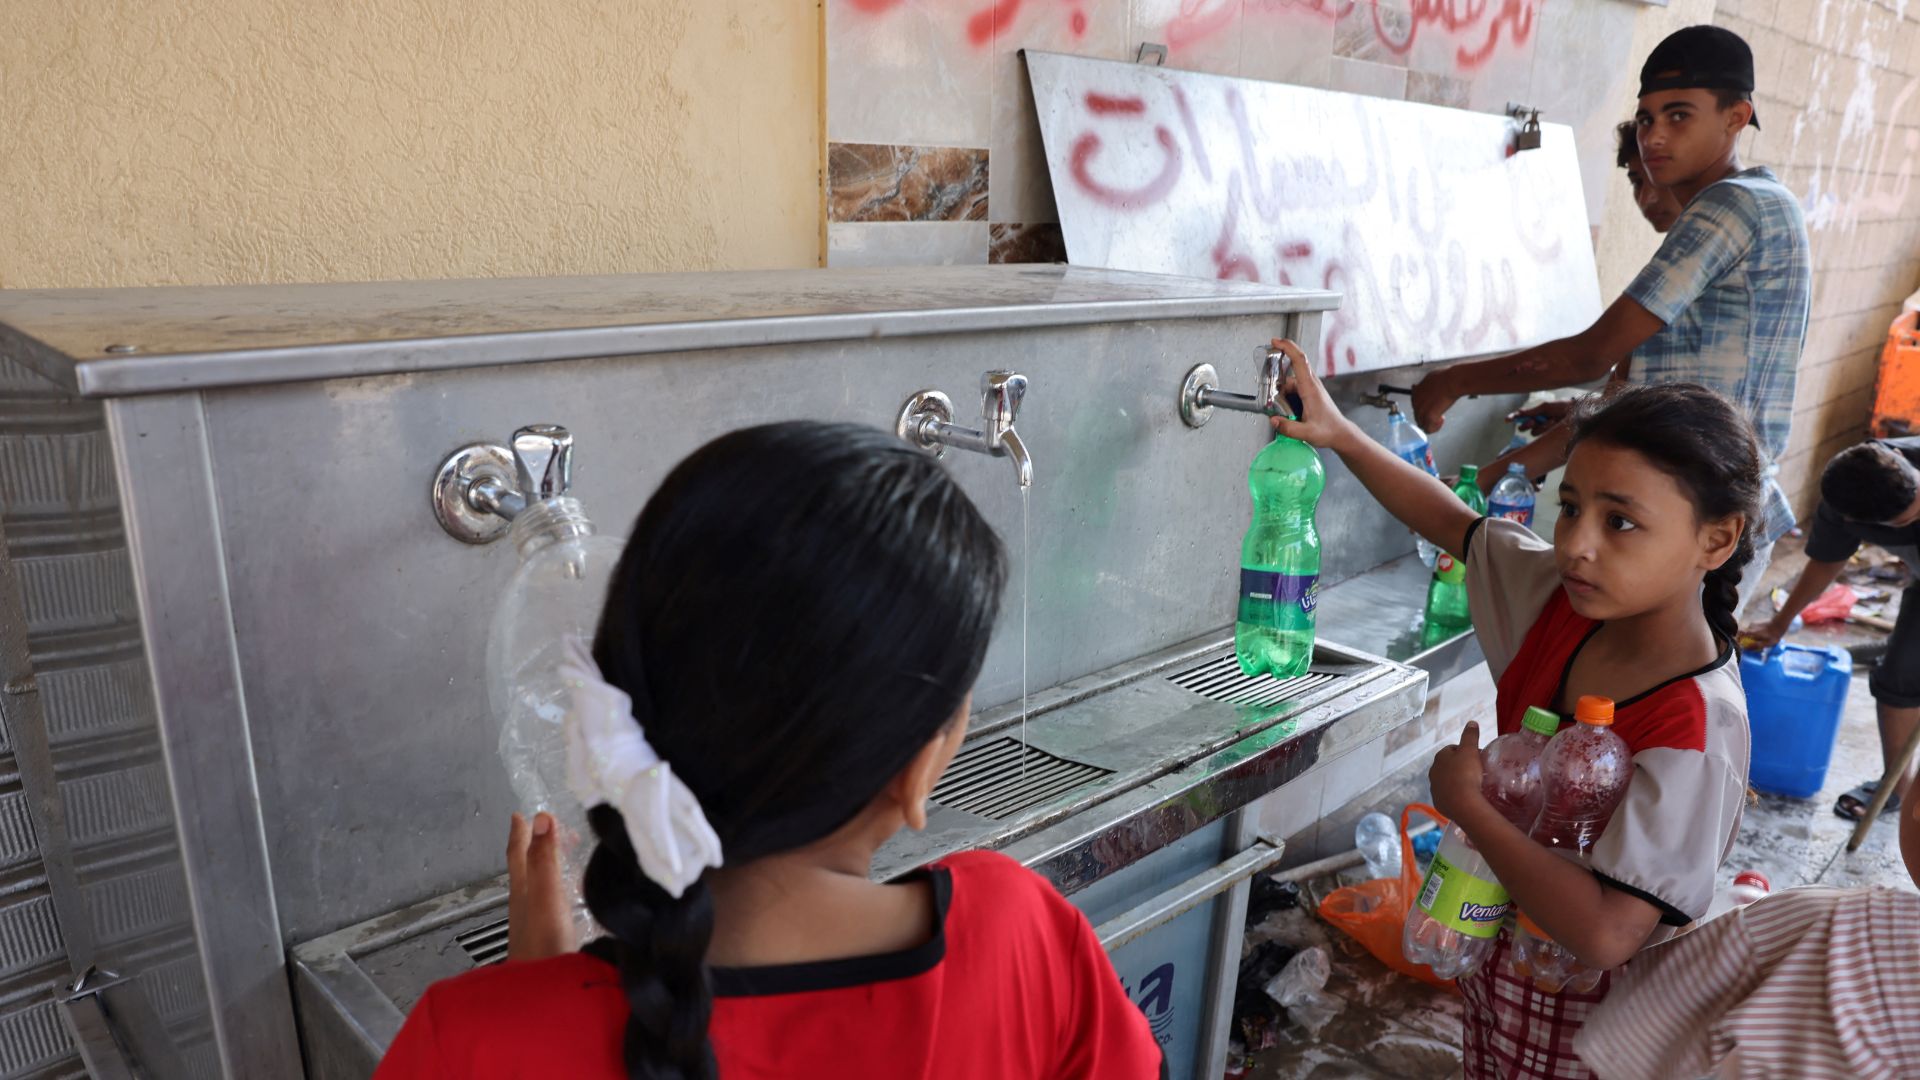 Children collect water from a public water collection point in Gaza city. /Mohammed Abed/AFP